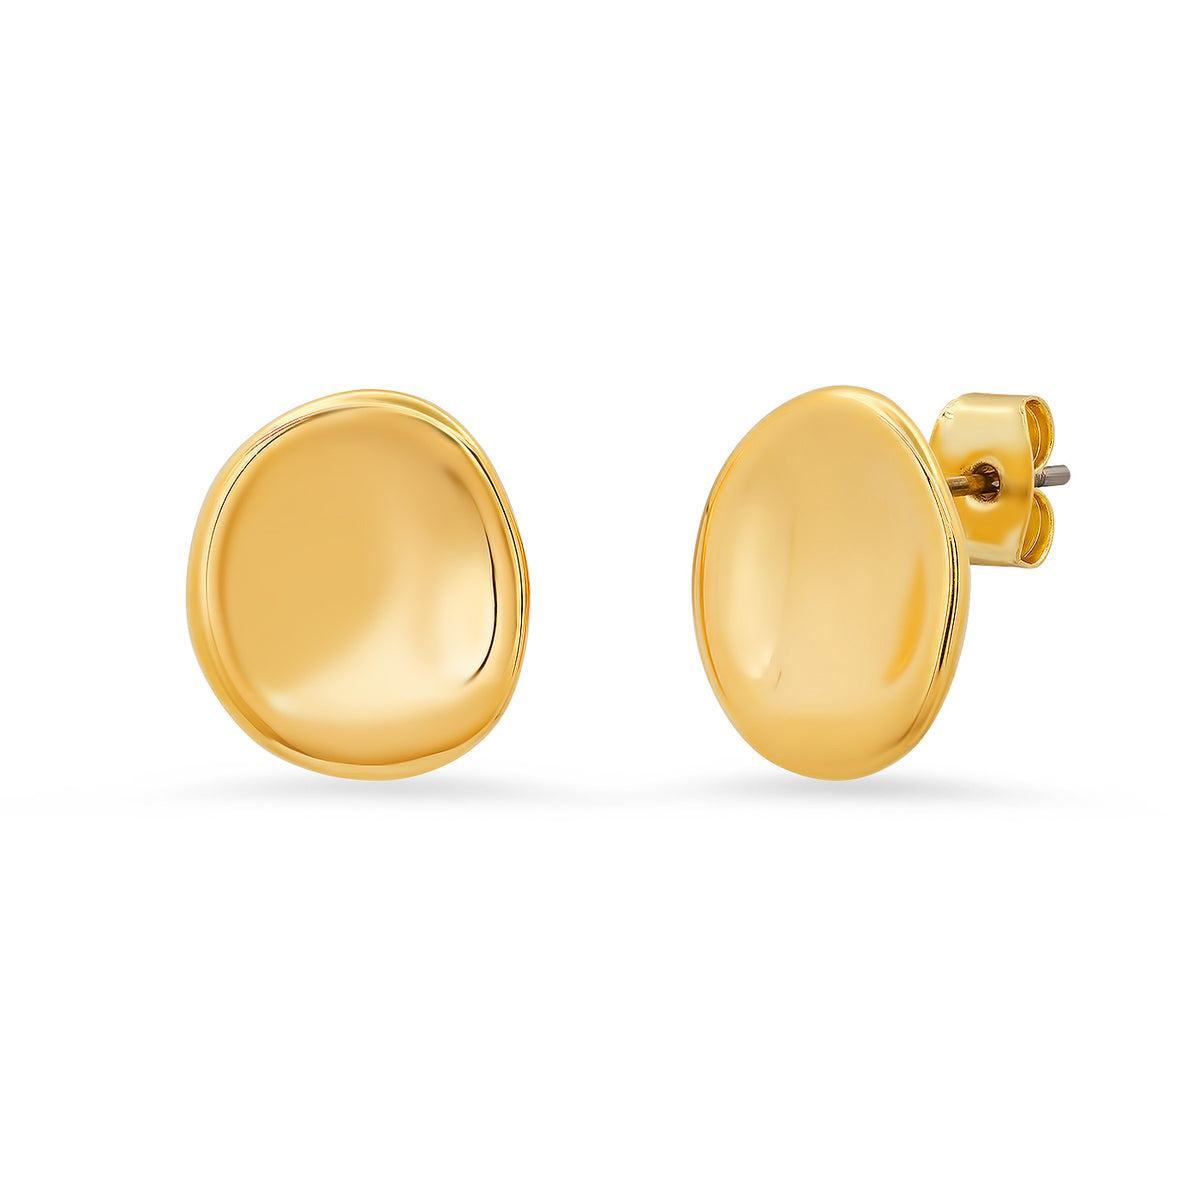 Tai Hammered Gold Button Earrings